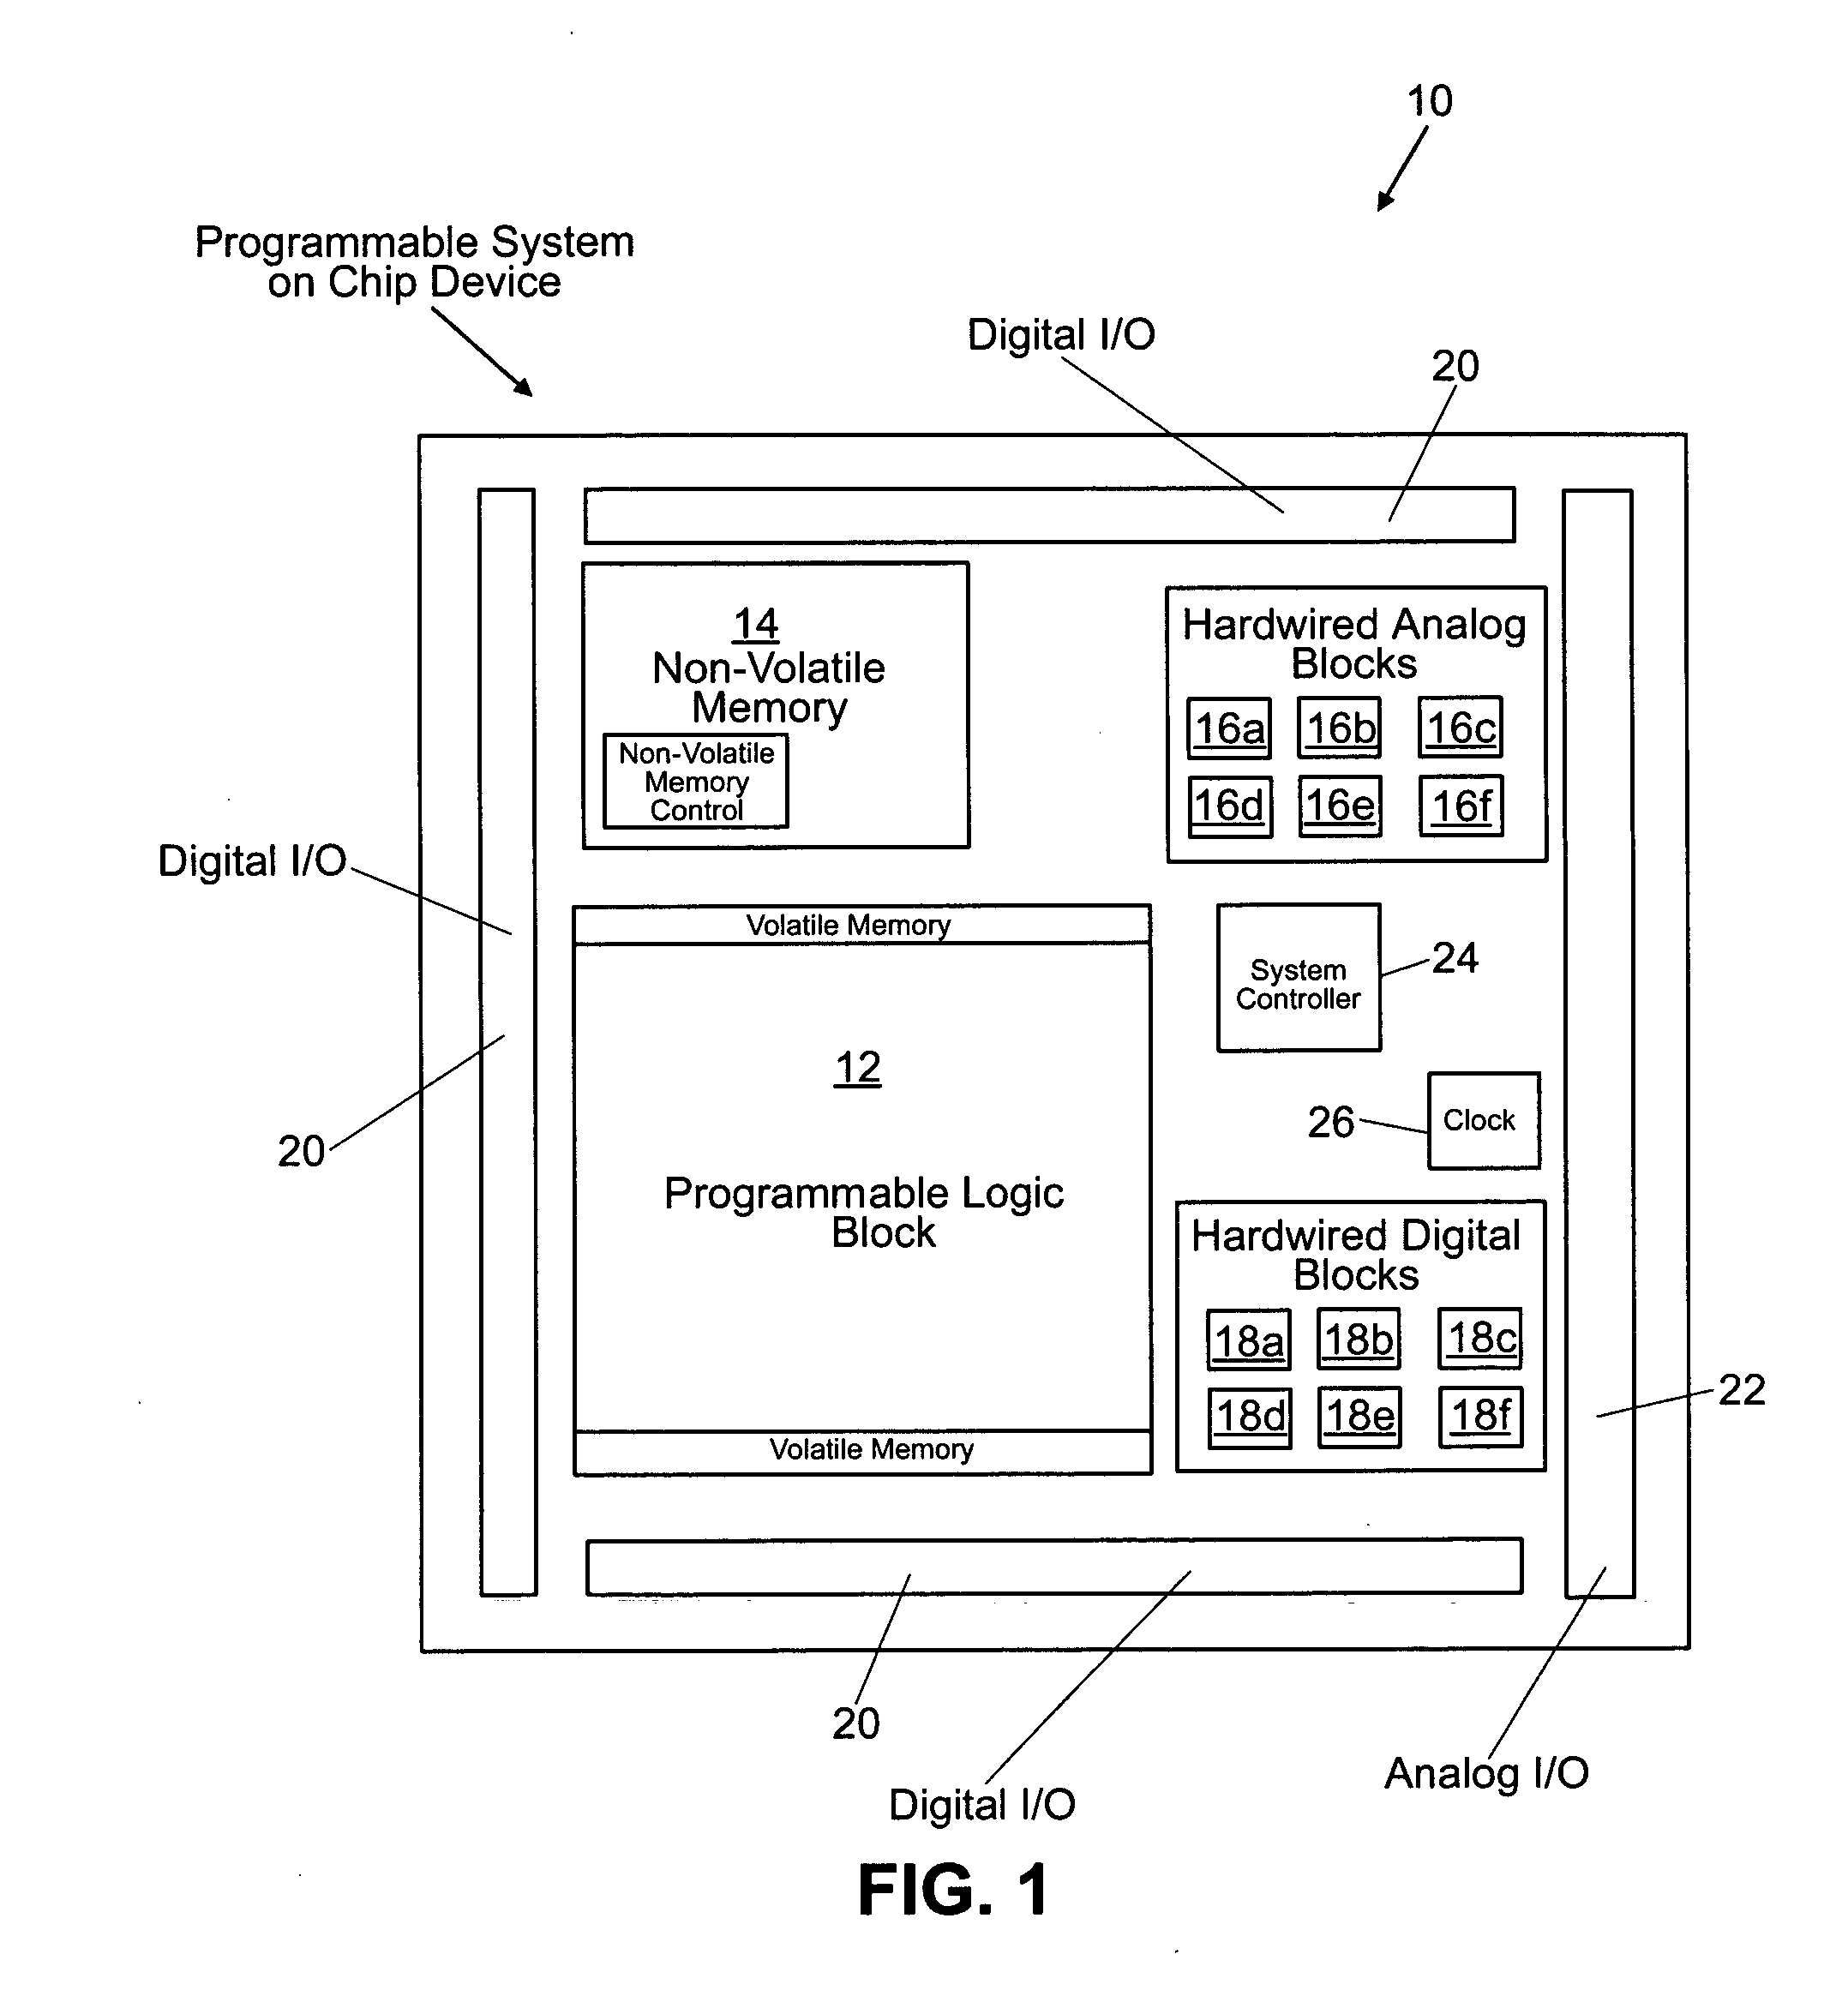 Programmable system on a chip